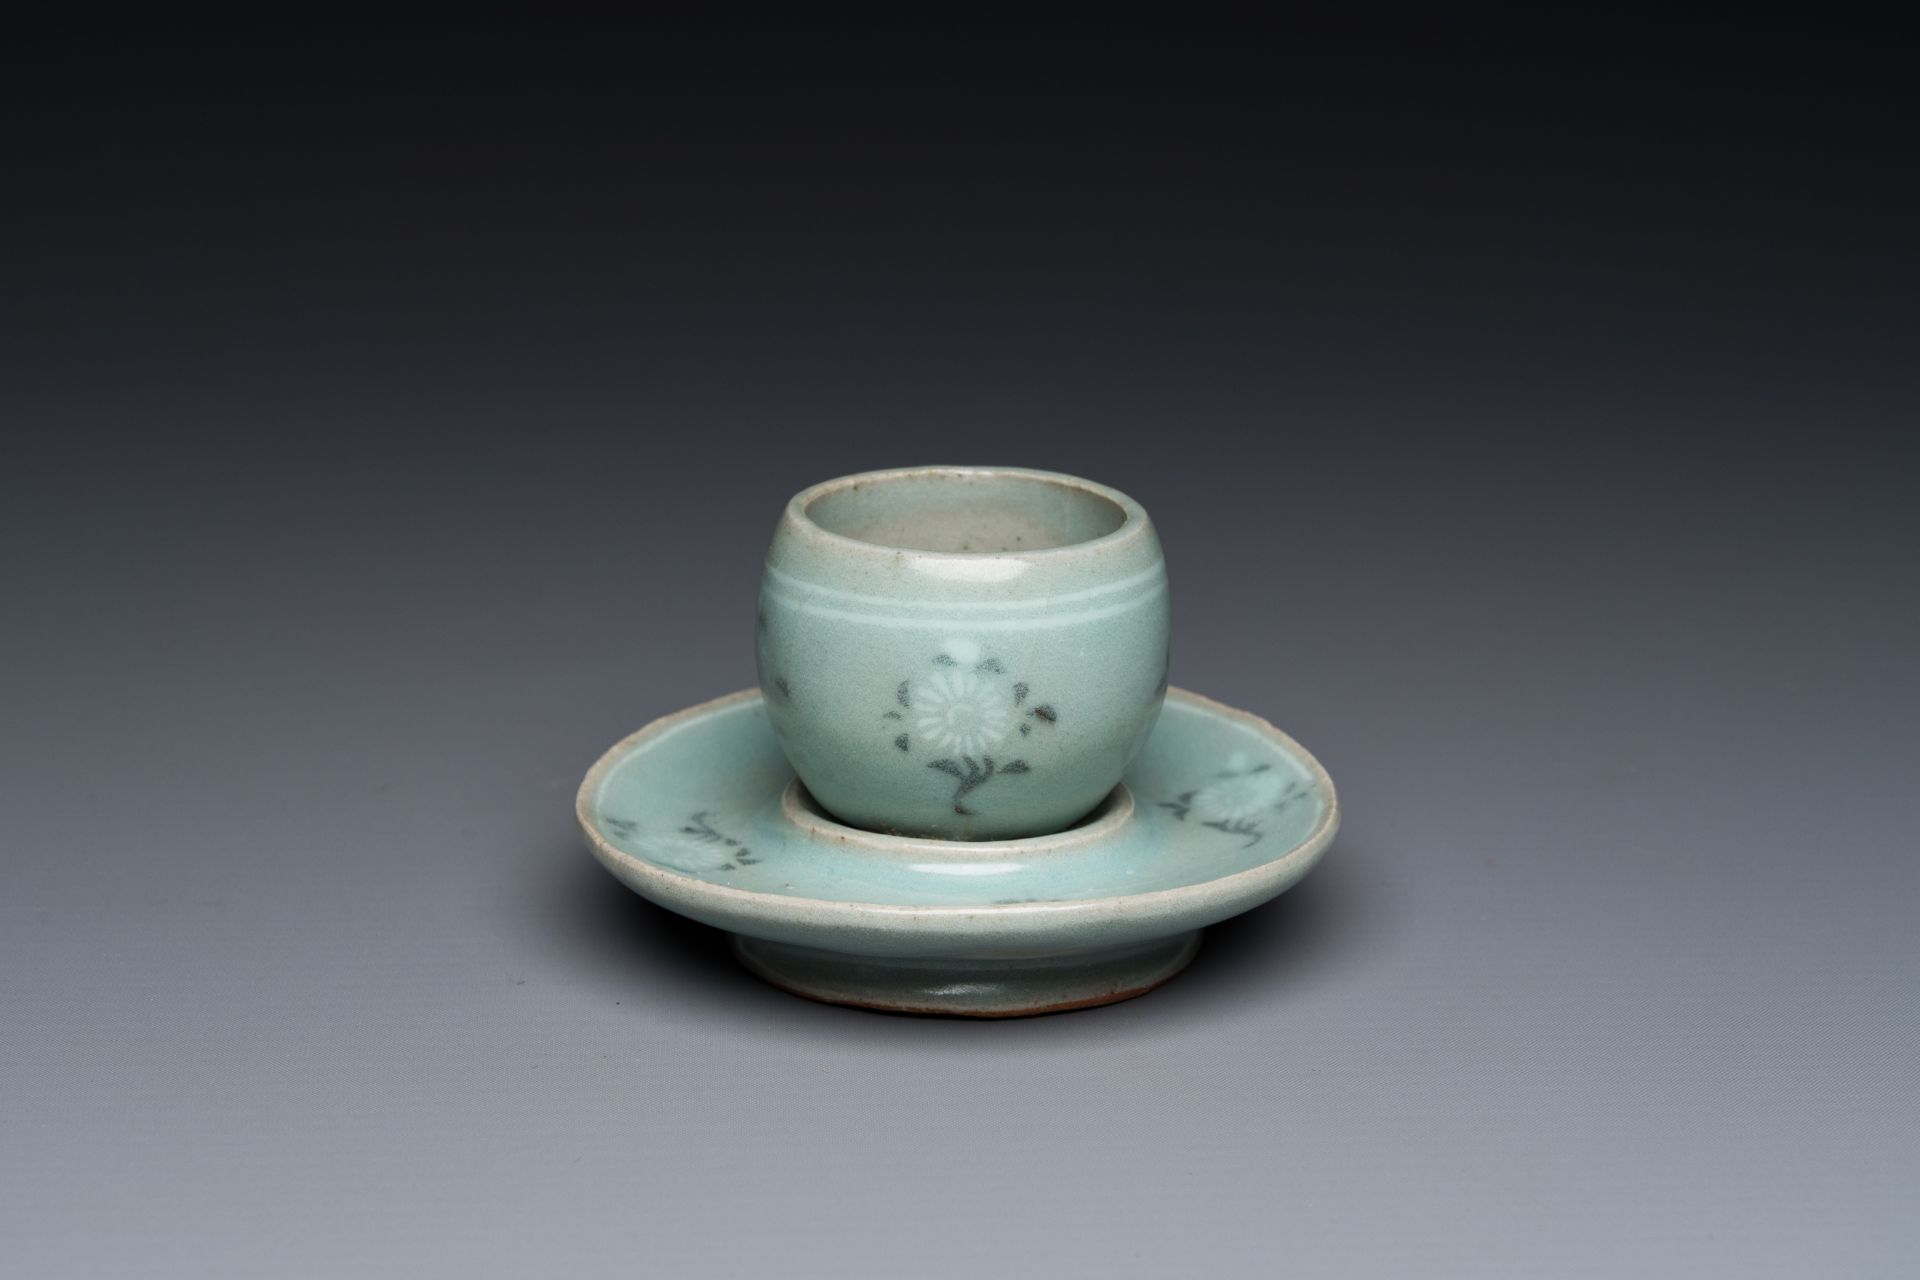 A Korean inlaid celadon cup on a stand, probably Goryeo, 13/14th C.